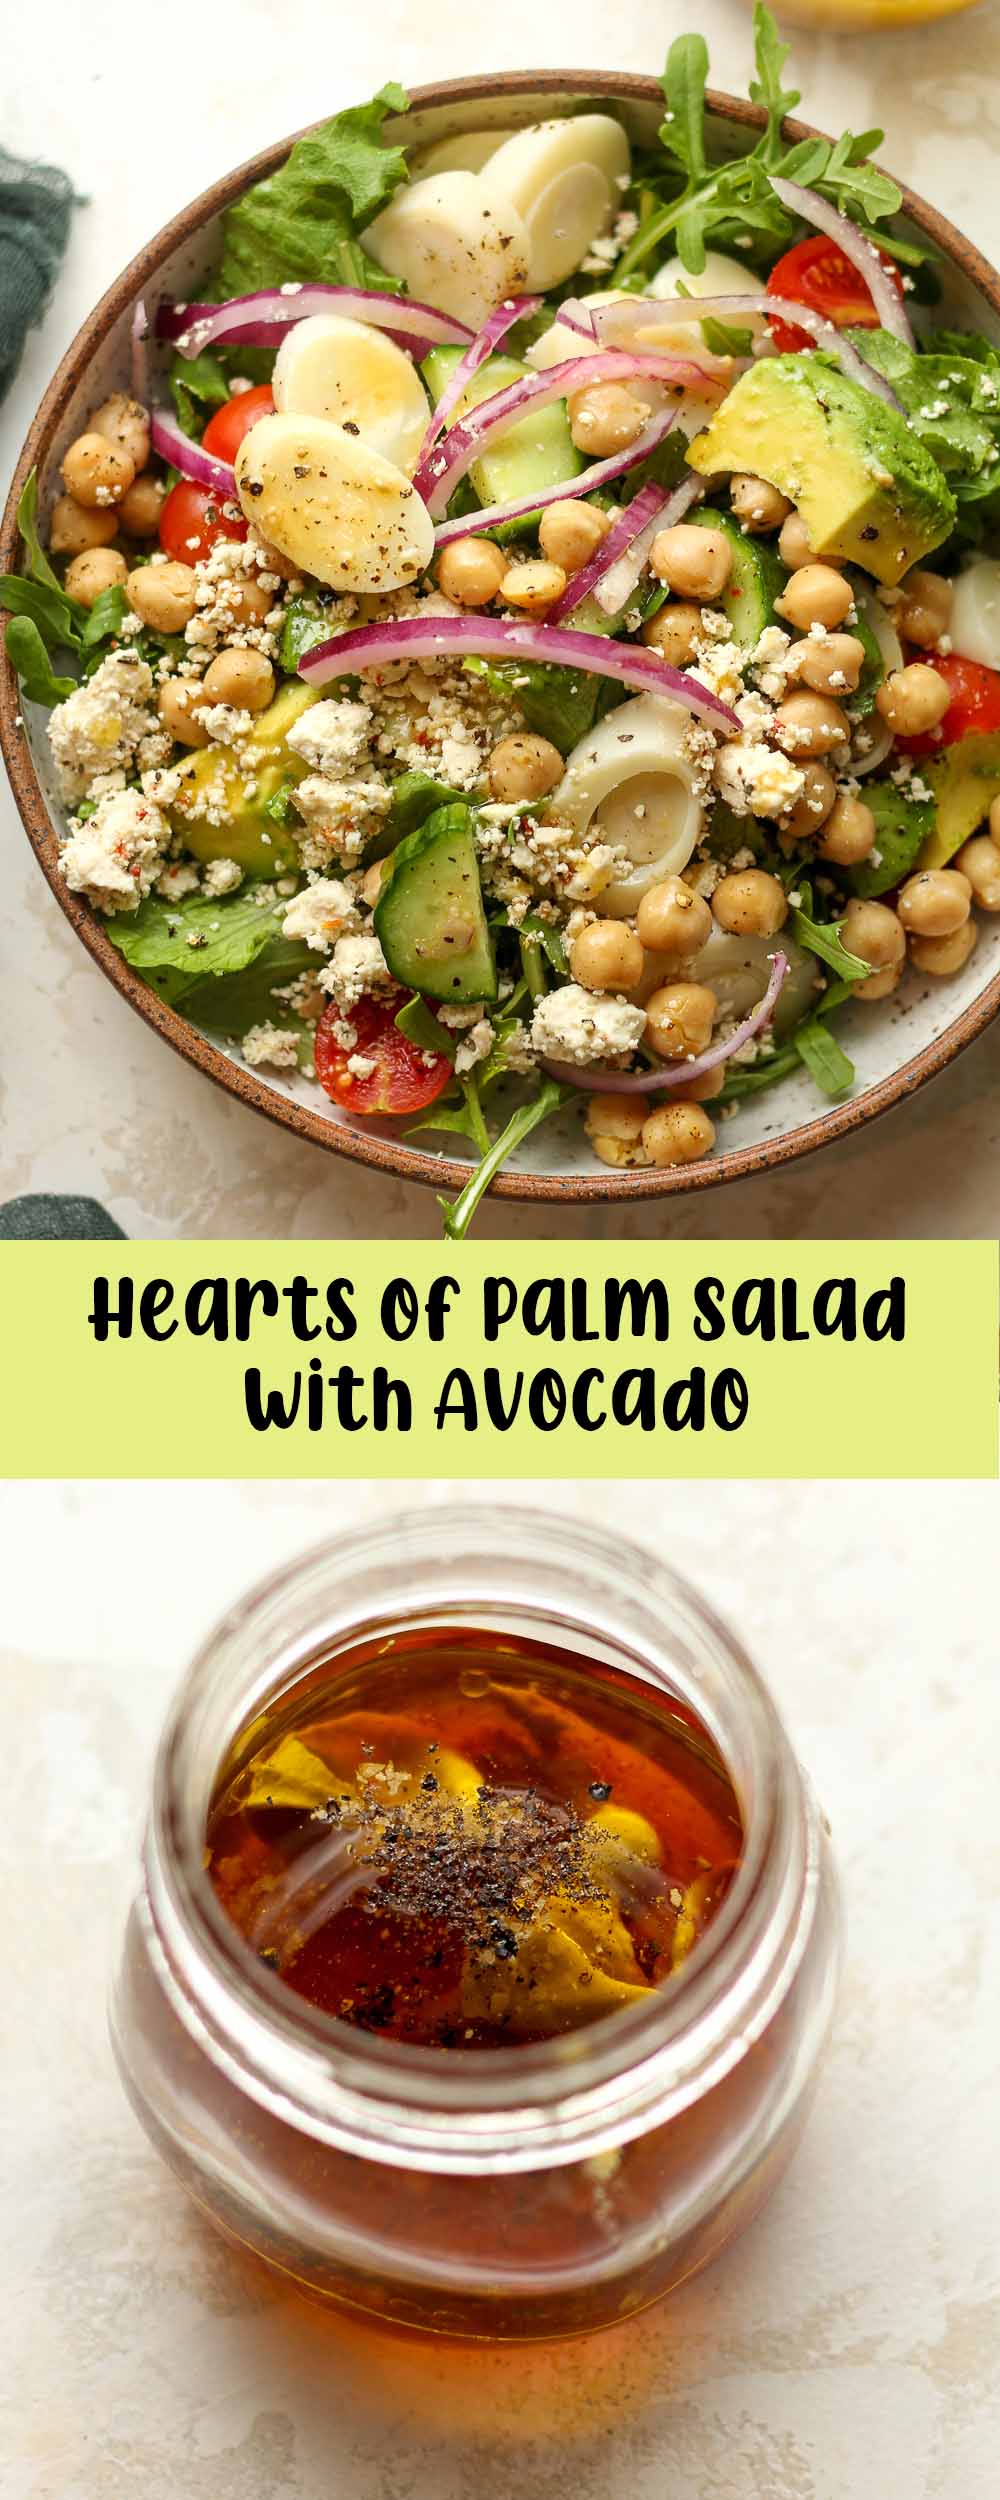 A collage of photos for hearts of palm salad with avocado.